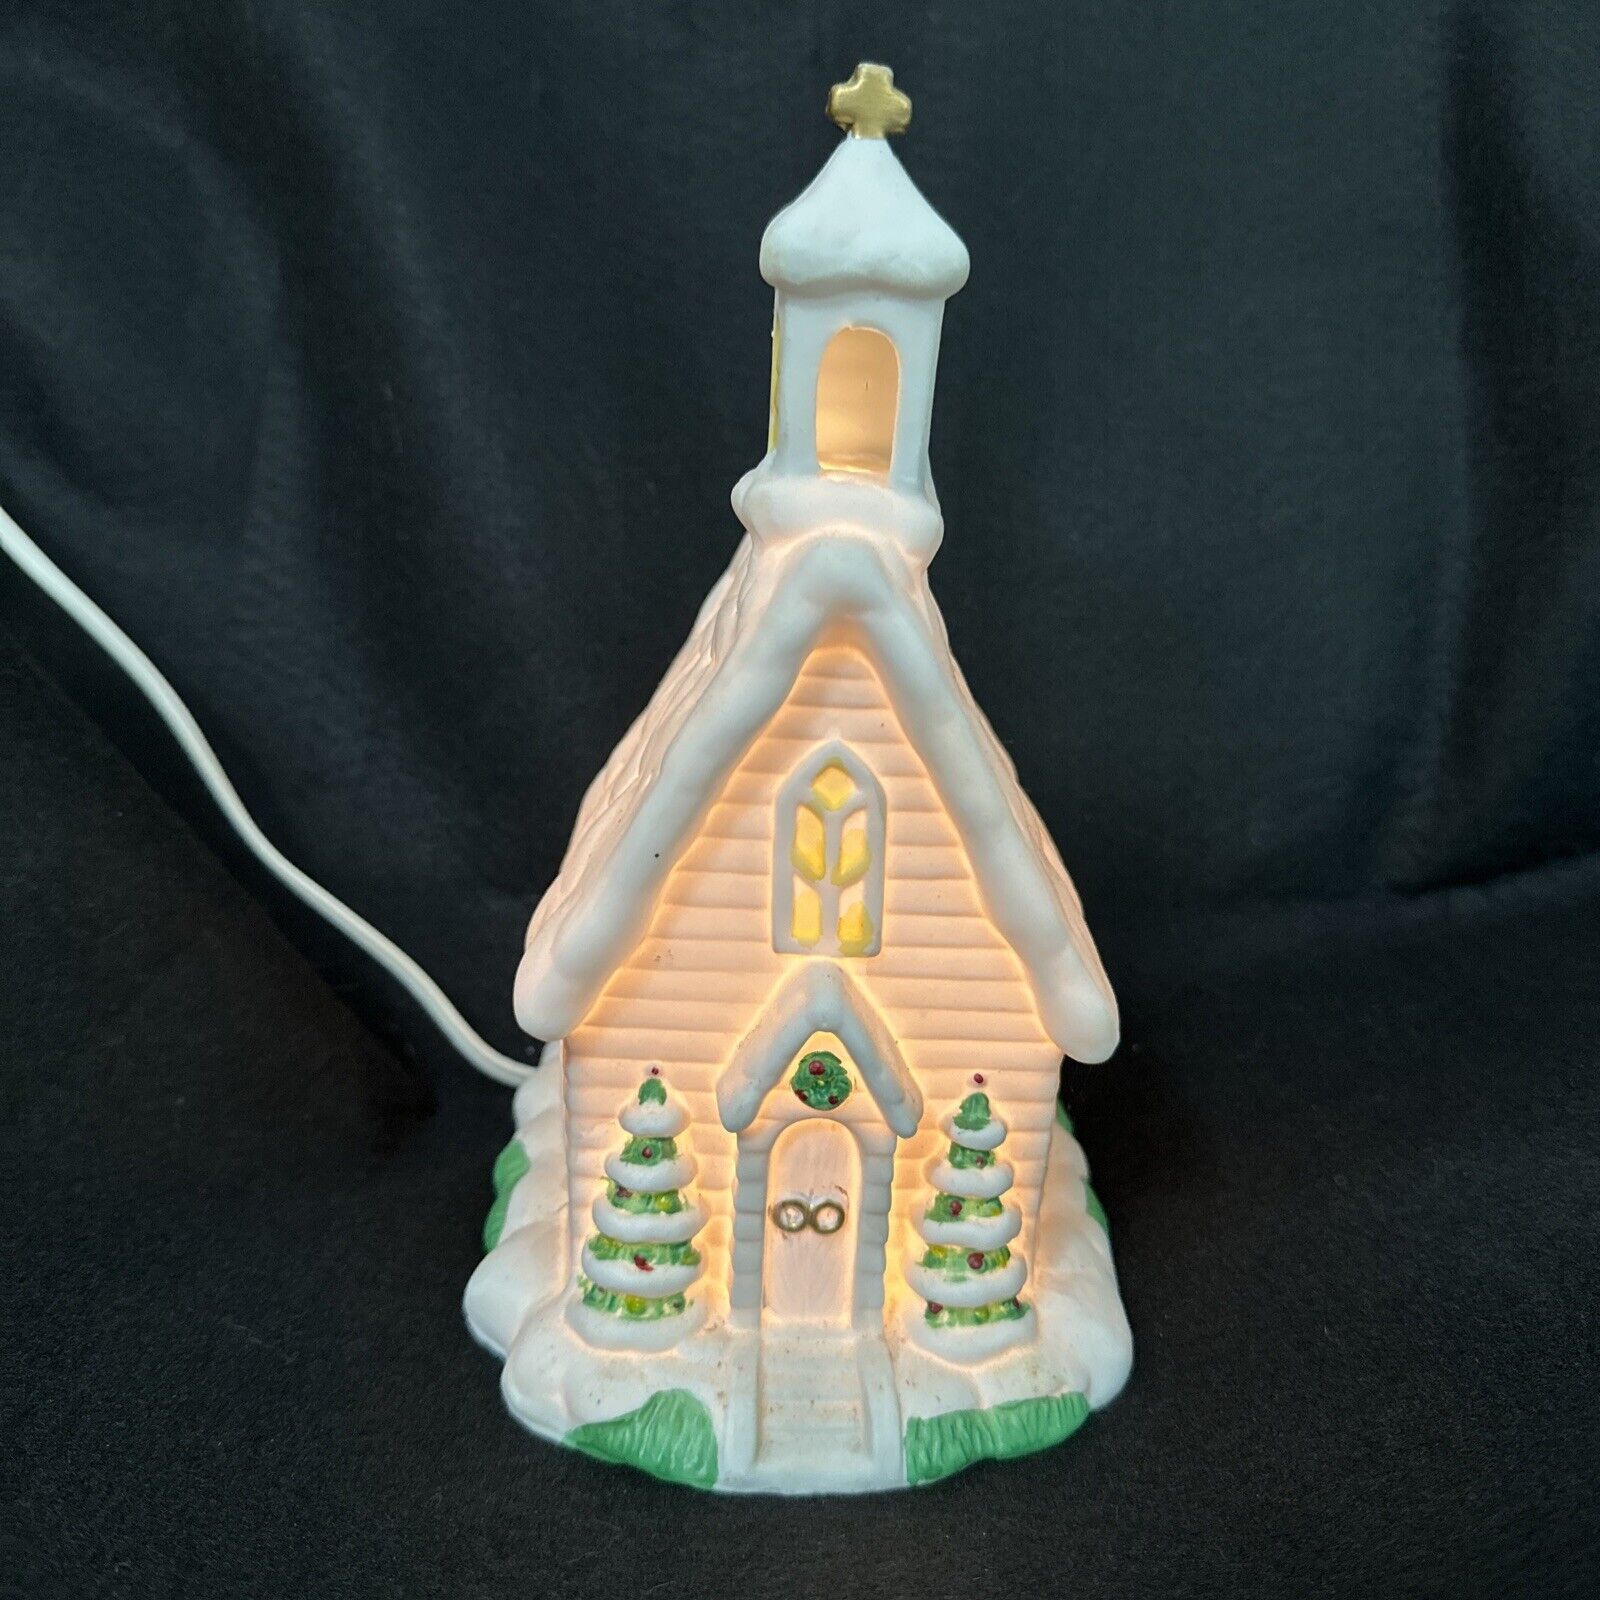 Vintage Lighted Porcelain Church Christmas Around The World In Original Box